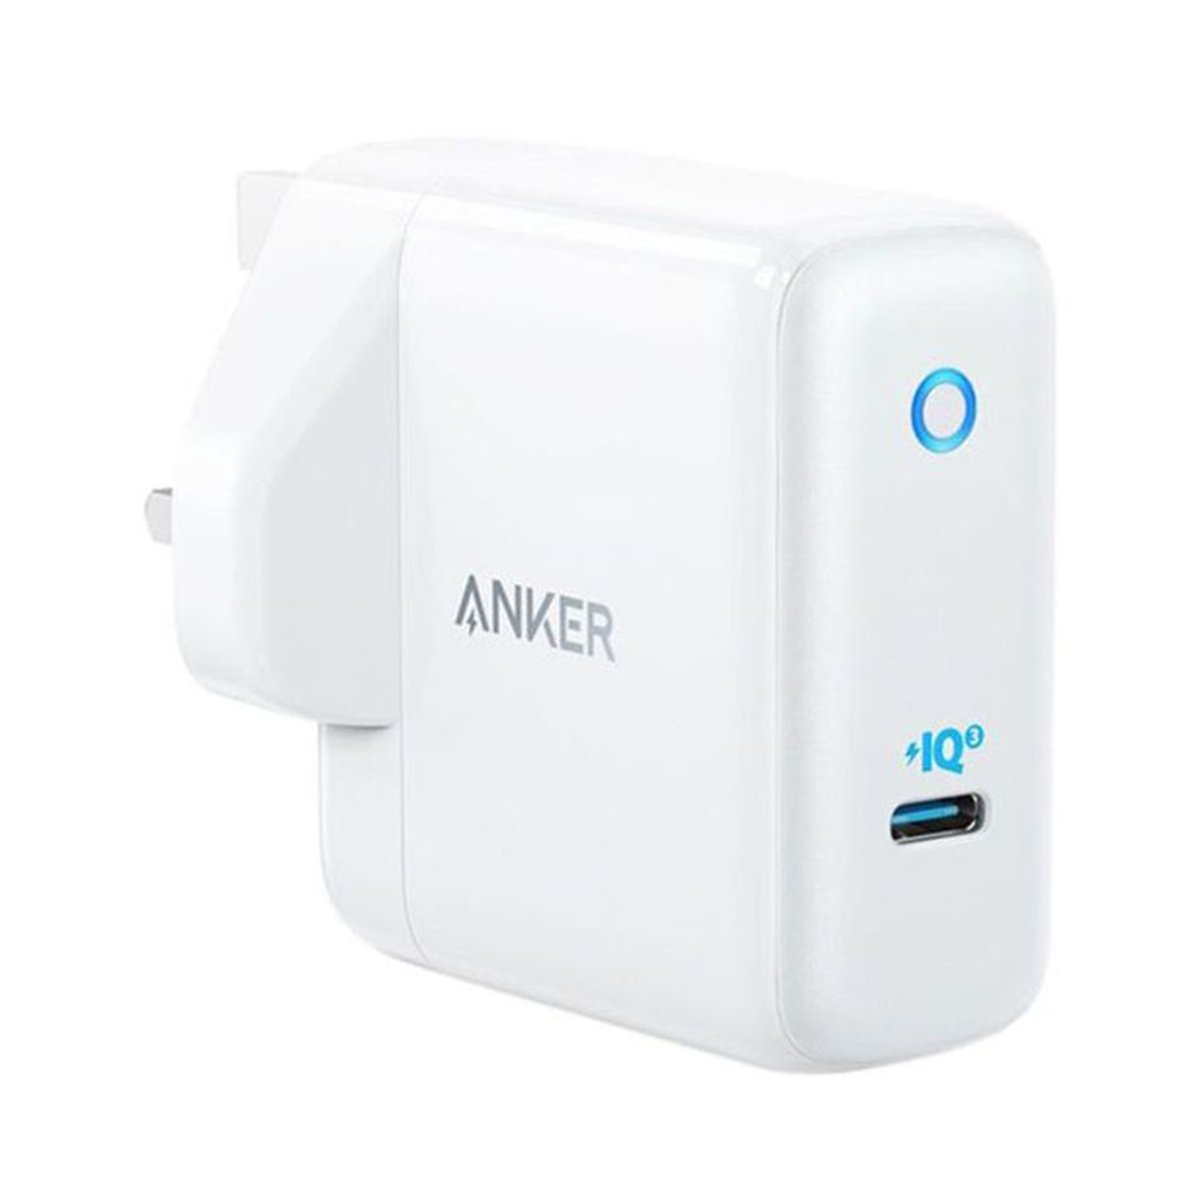 Anker Power Portable Charger A2613K21 White